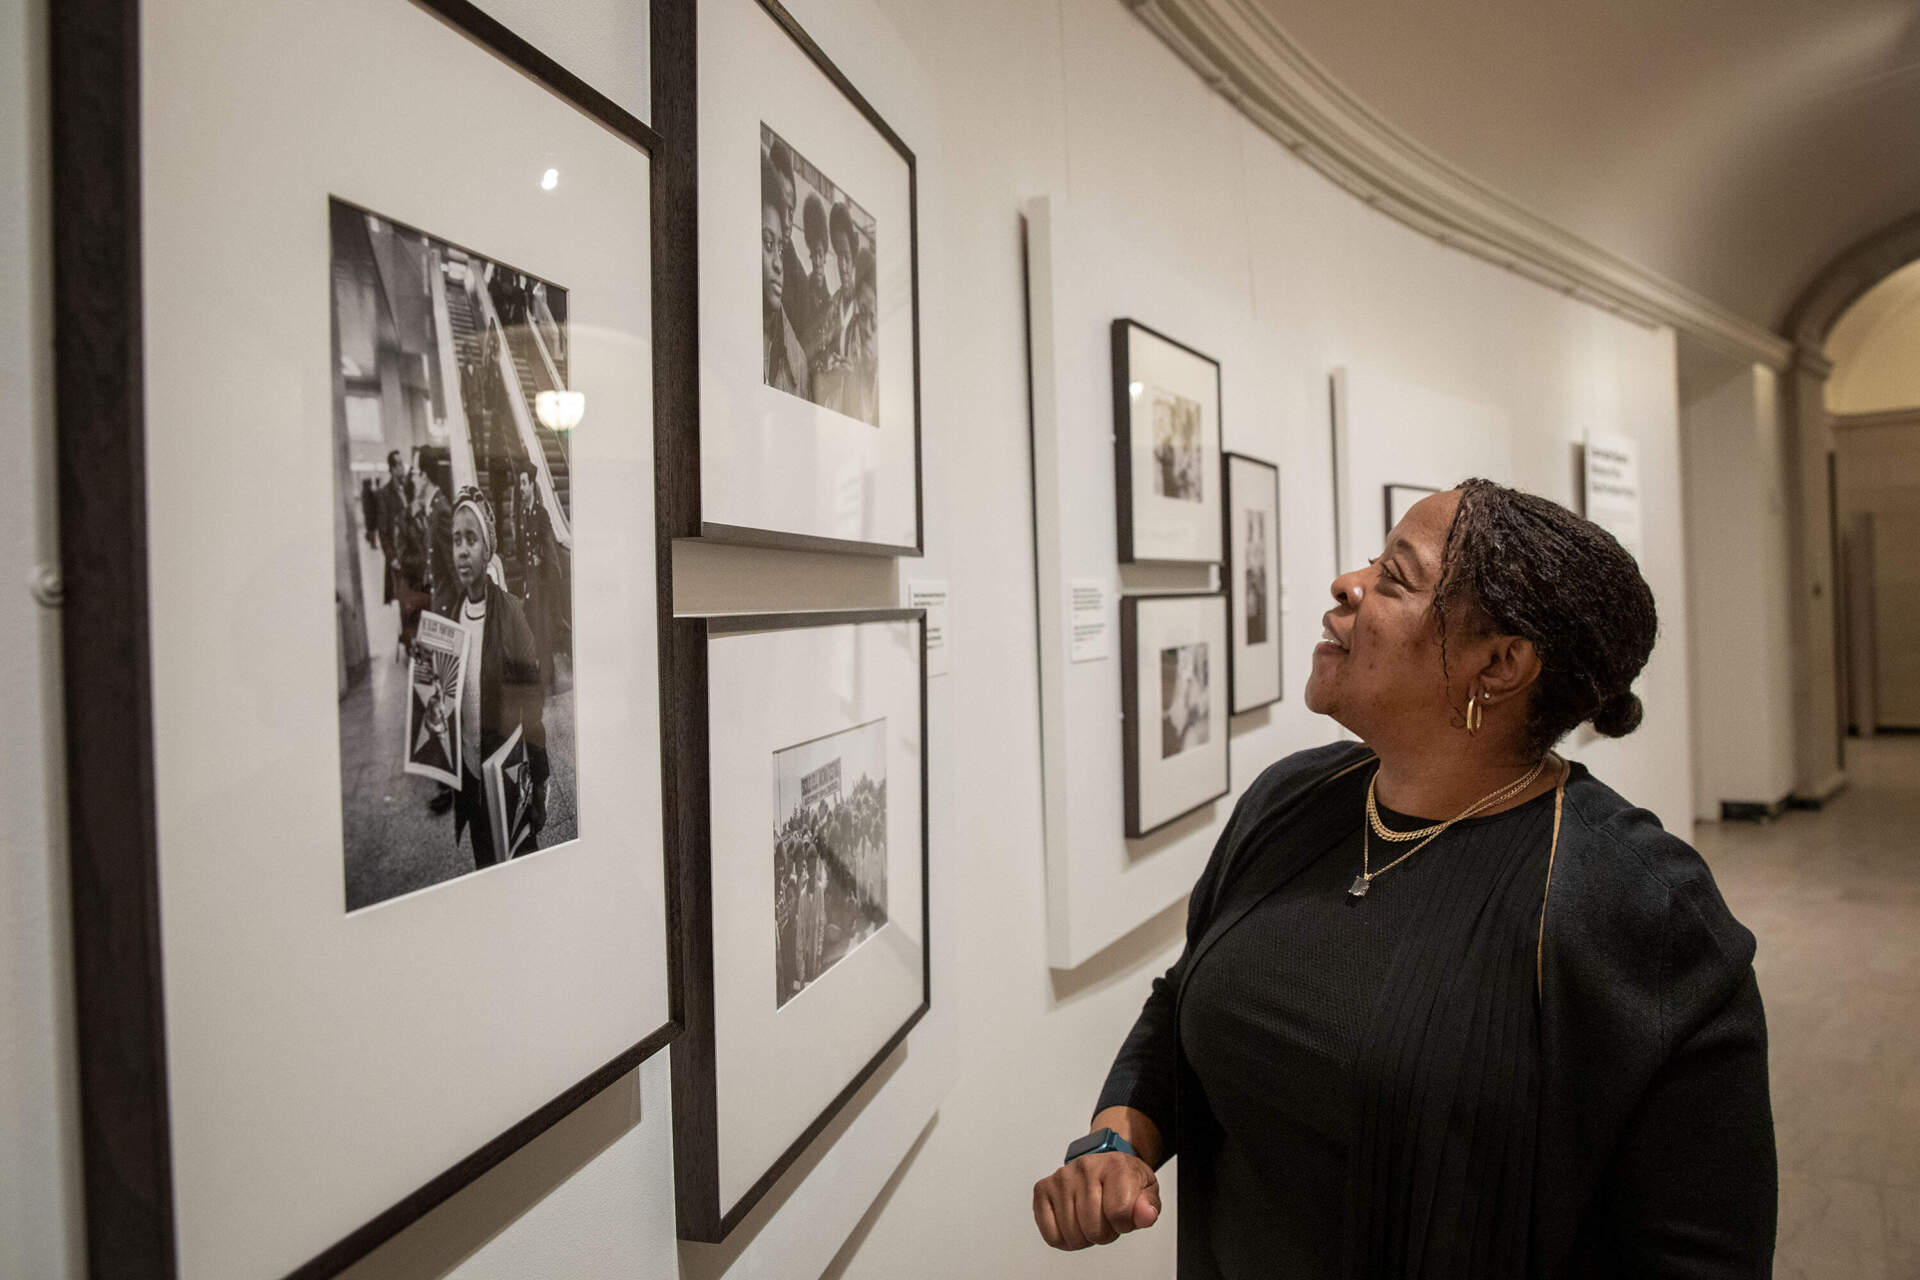 Gail Jones looks at a 1970 photograph by Stephen Shames of herself with her siblings and two friends, in the MFA Boston's 